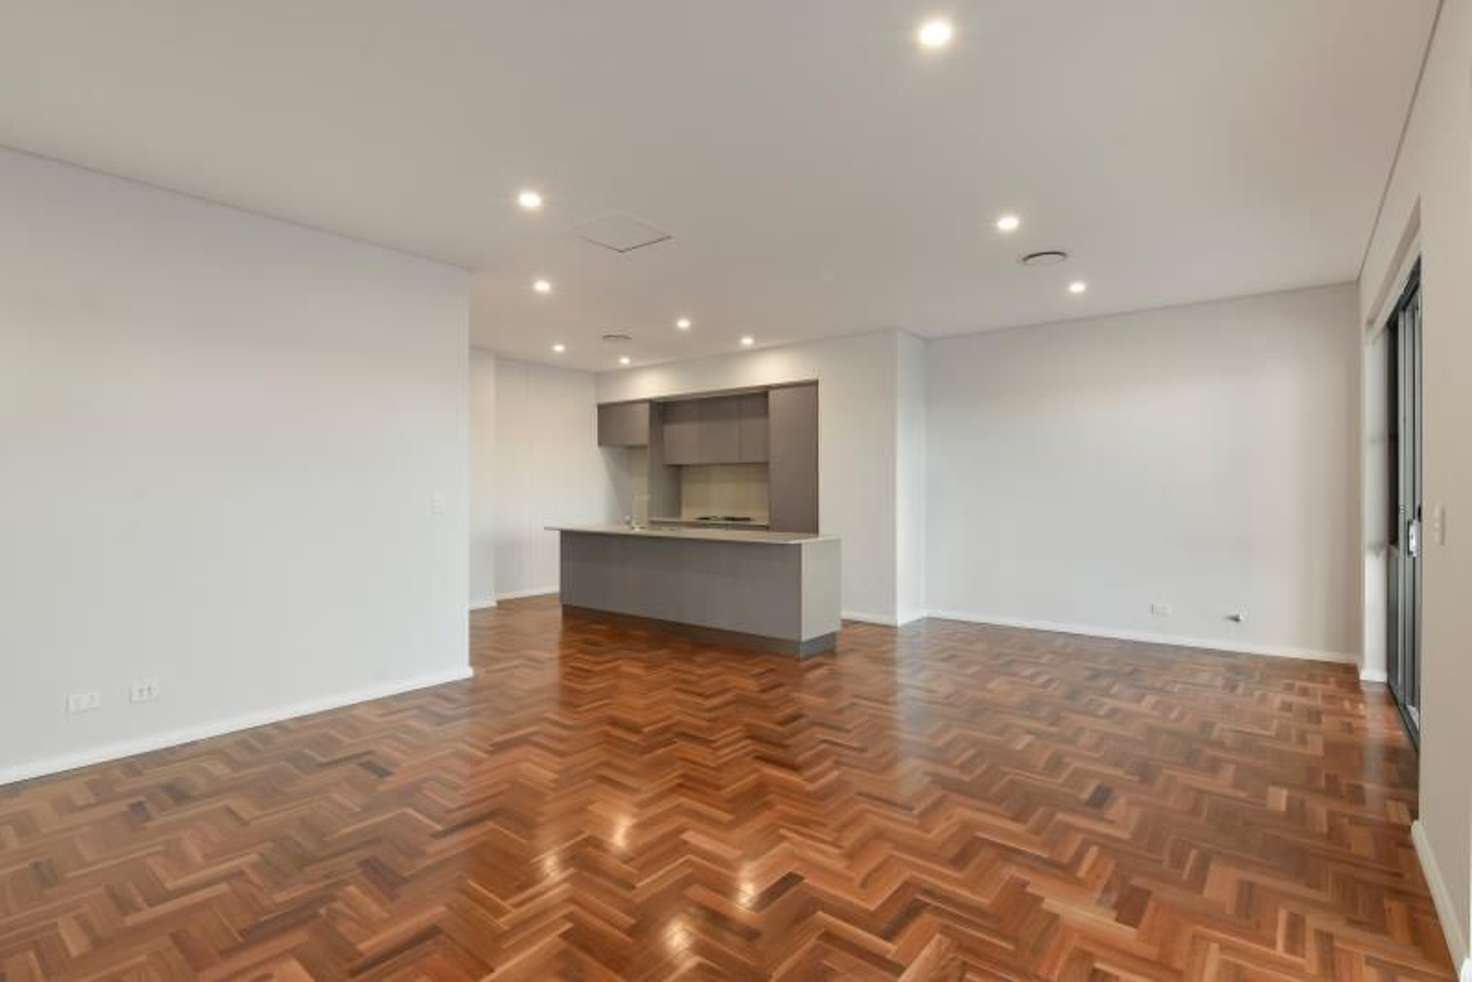 Main view of Homely apartment listing, 17/166 MAROUBRA Road, Maroubra NSW 2035